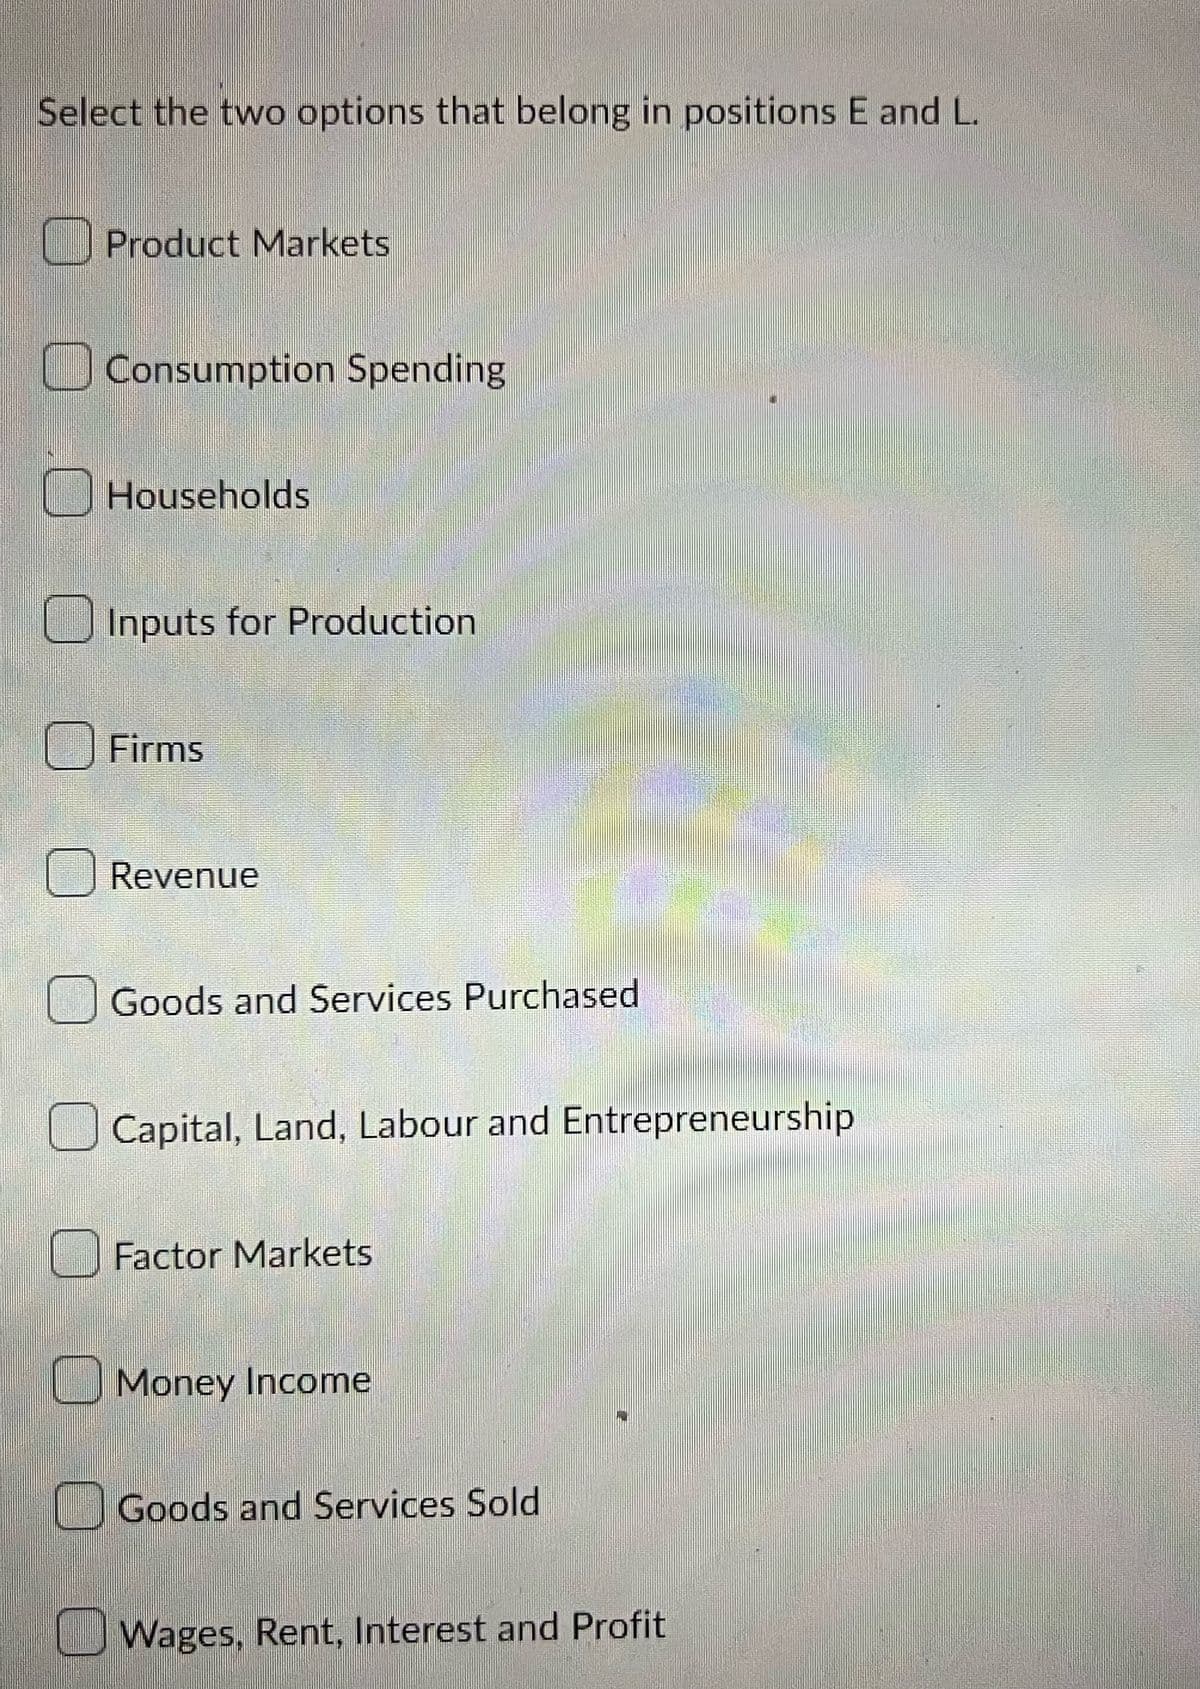 Select the two options that belong in positions E and L.
Product Markets
Consumption Spending
Households
Inputs for Production
Firms
Revenue
Goods and Services Purchased
Capital, Land, Labour and Entrepreneurship
Factor Markets
Money Income
Goods and Services Sold
Wages, Rent, Interest and Profit
SE
in